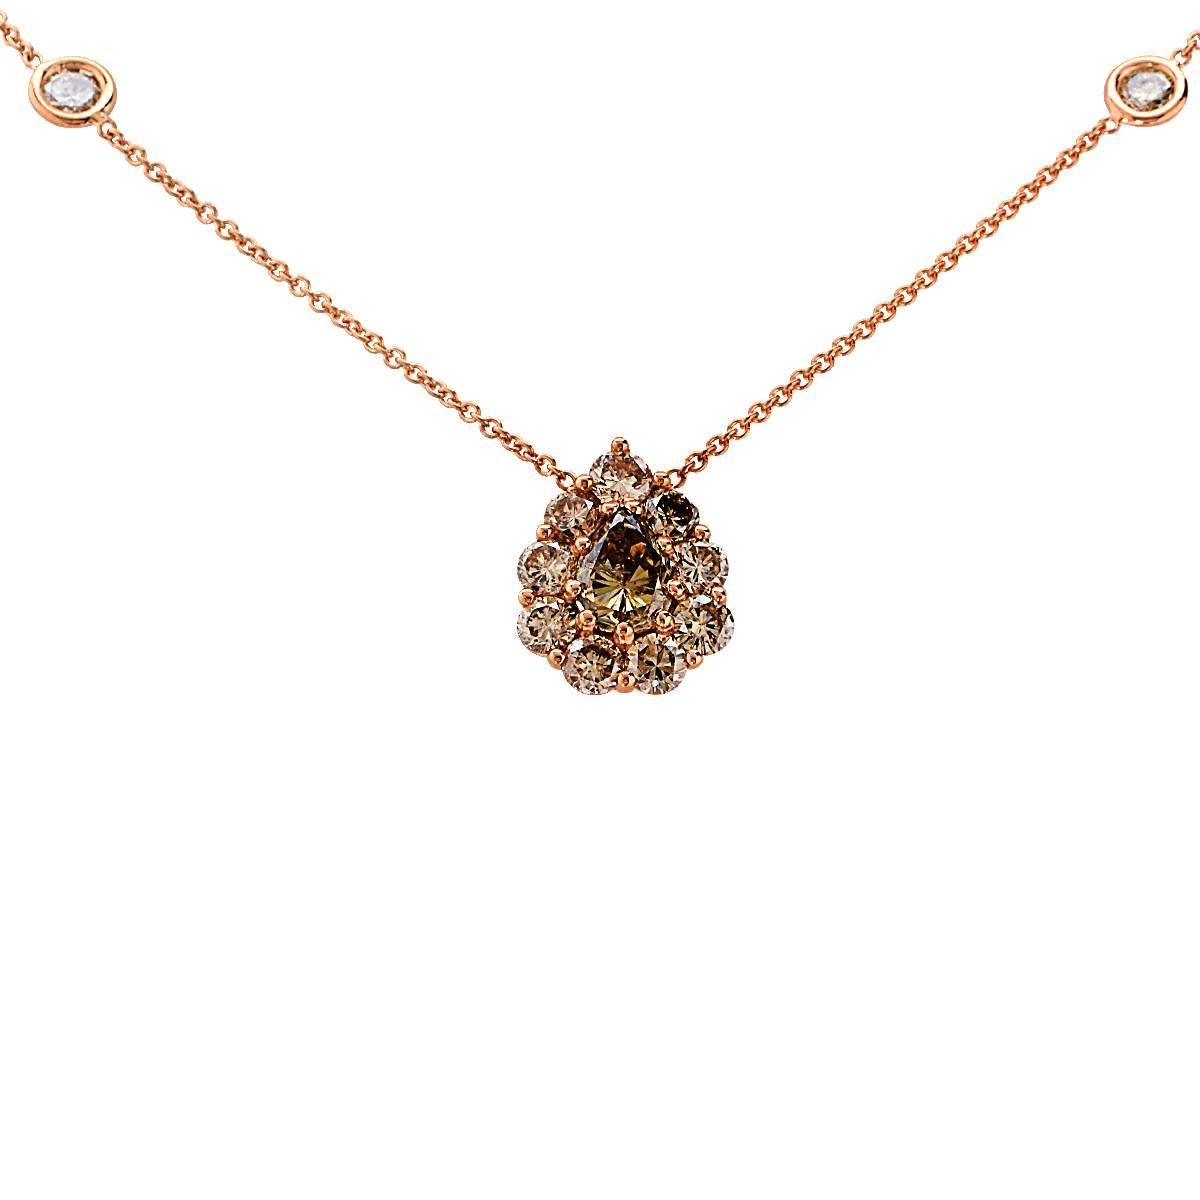 4.75 Carat Fancy Colored Diamond Gold Necklace In New Condition For Sale In Miami, FL